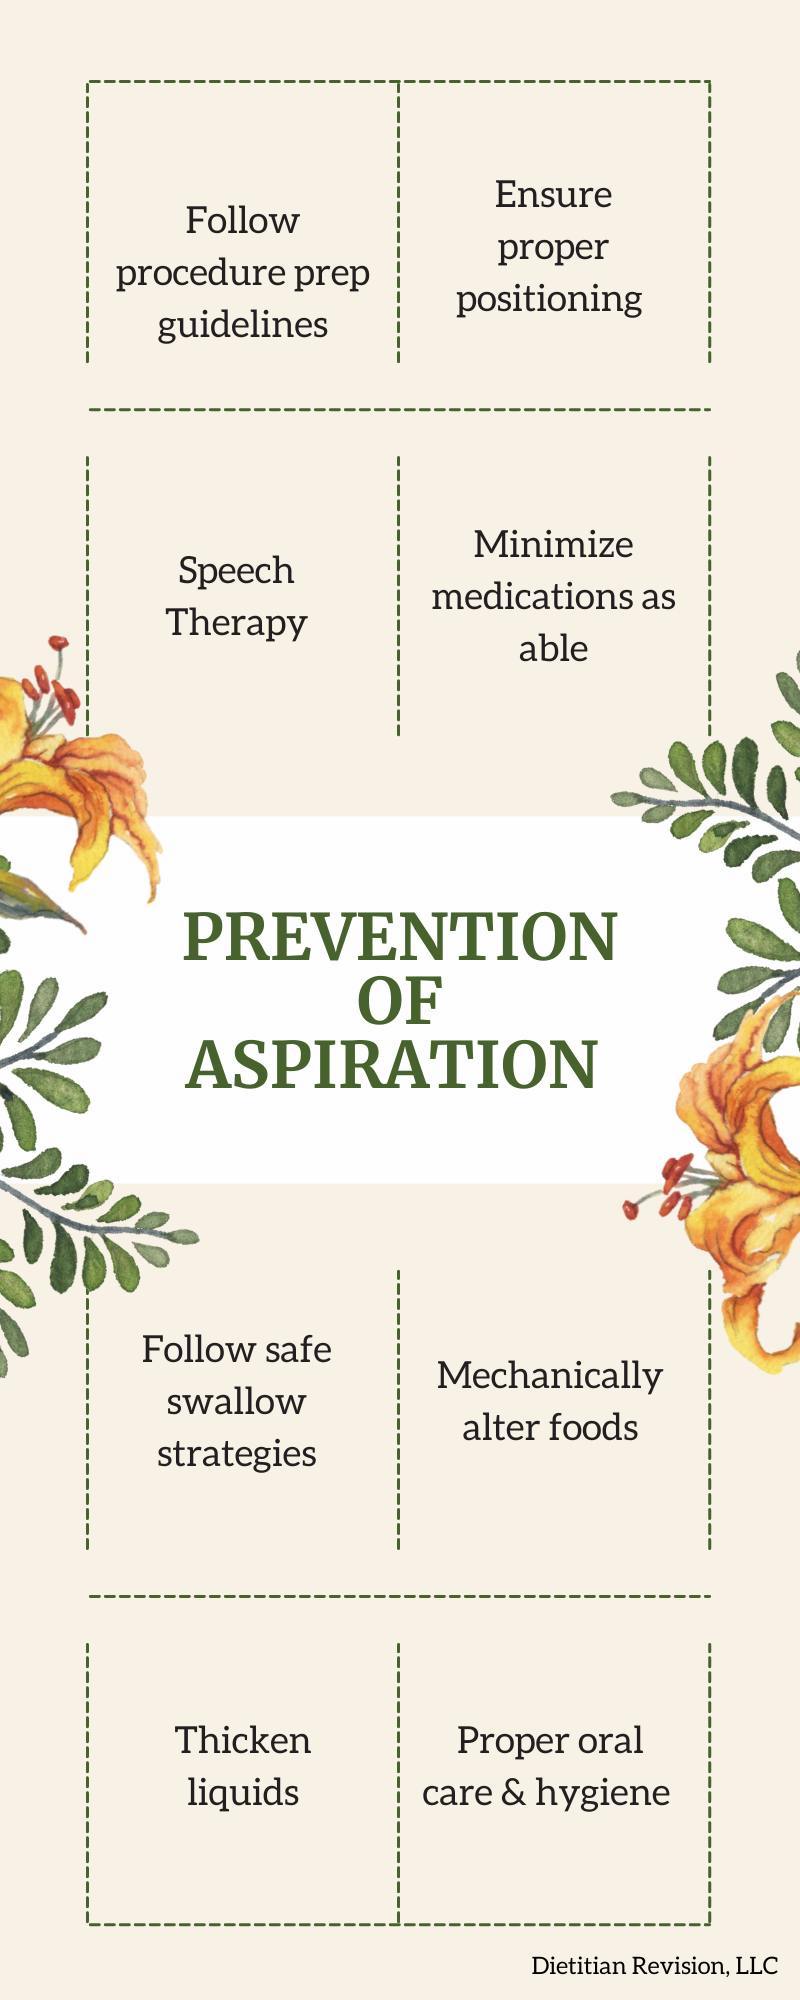 Prevention of Aspiration: follow procedure prep guidelines, ensure proper positioning, speech therapy, minimize medications, follow safe swallow strategies, mechanically alter foods, thicken liquids, proper oral care. 